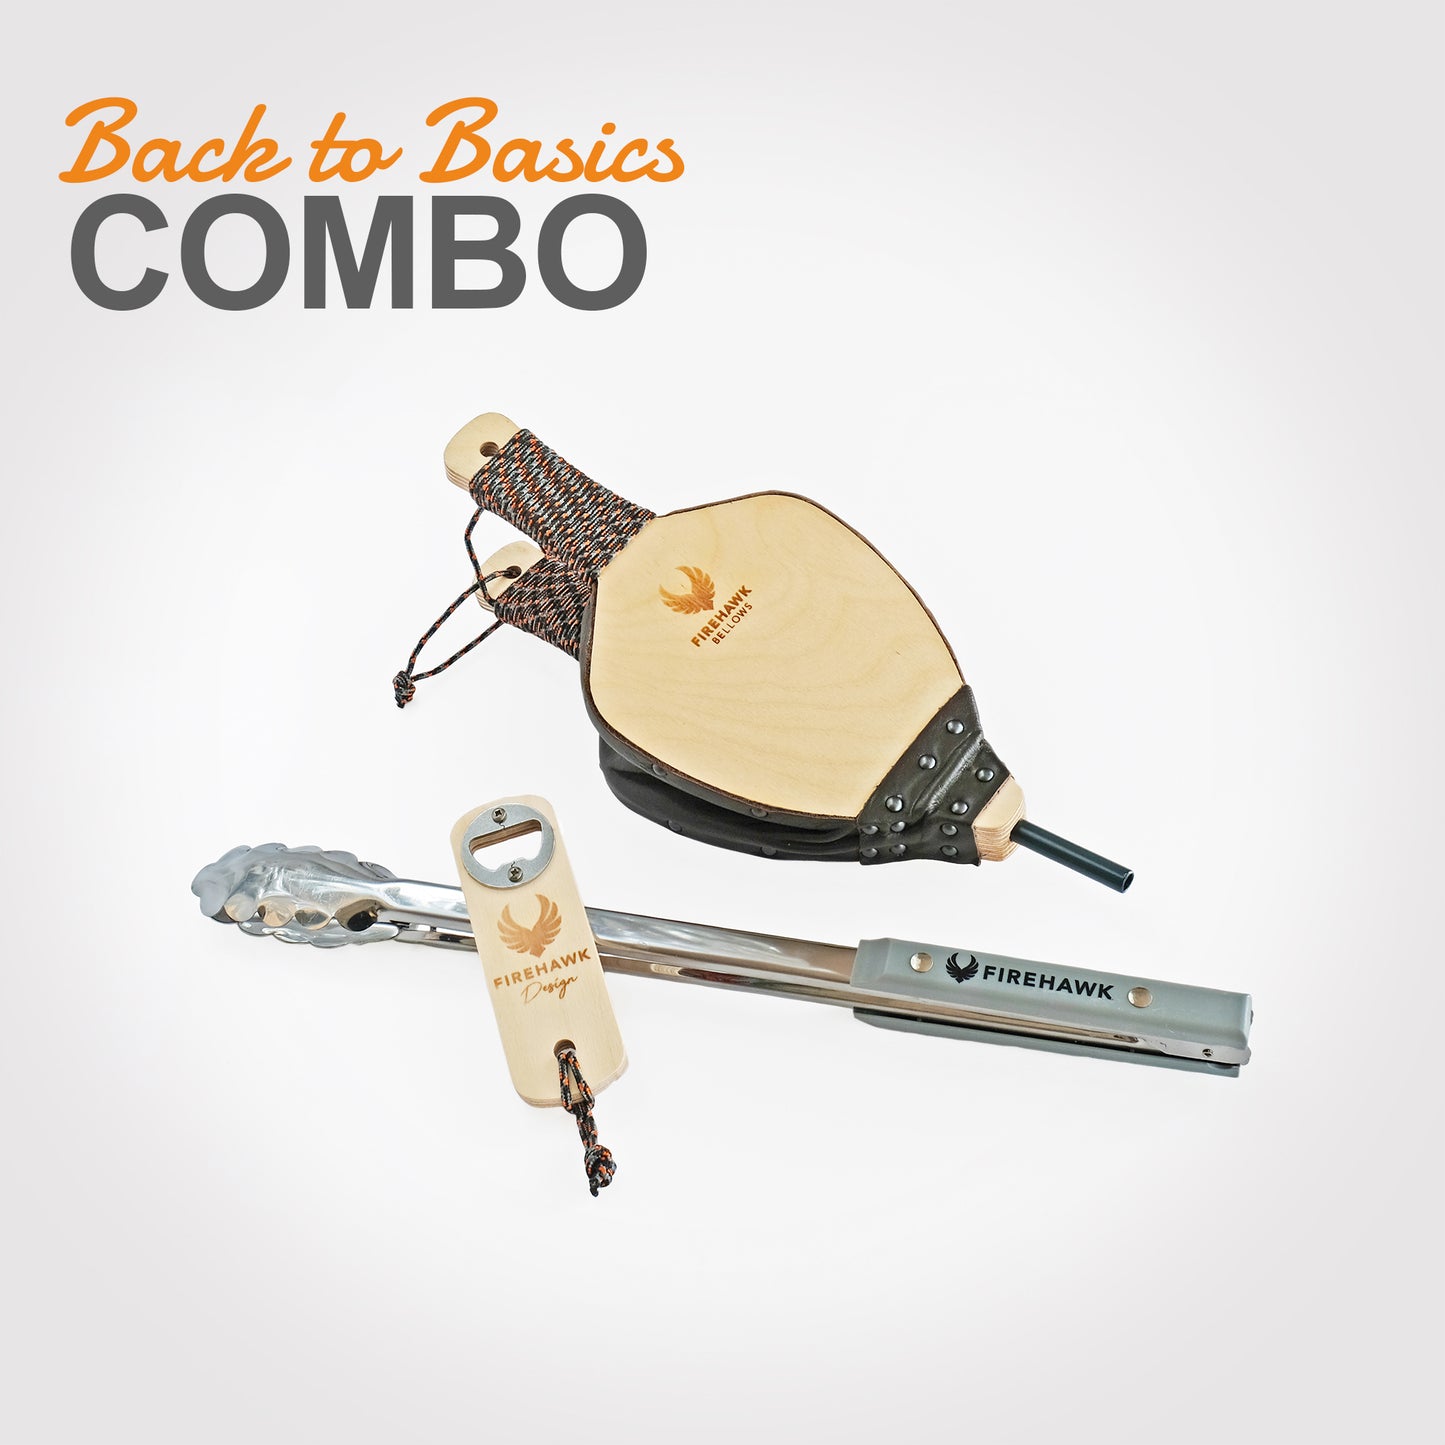 Small COMBO Back-to-Basics Bellow with Bottle opener and Braai tongs